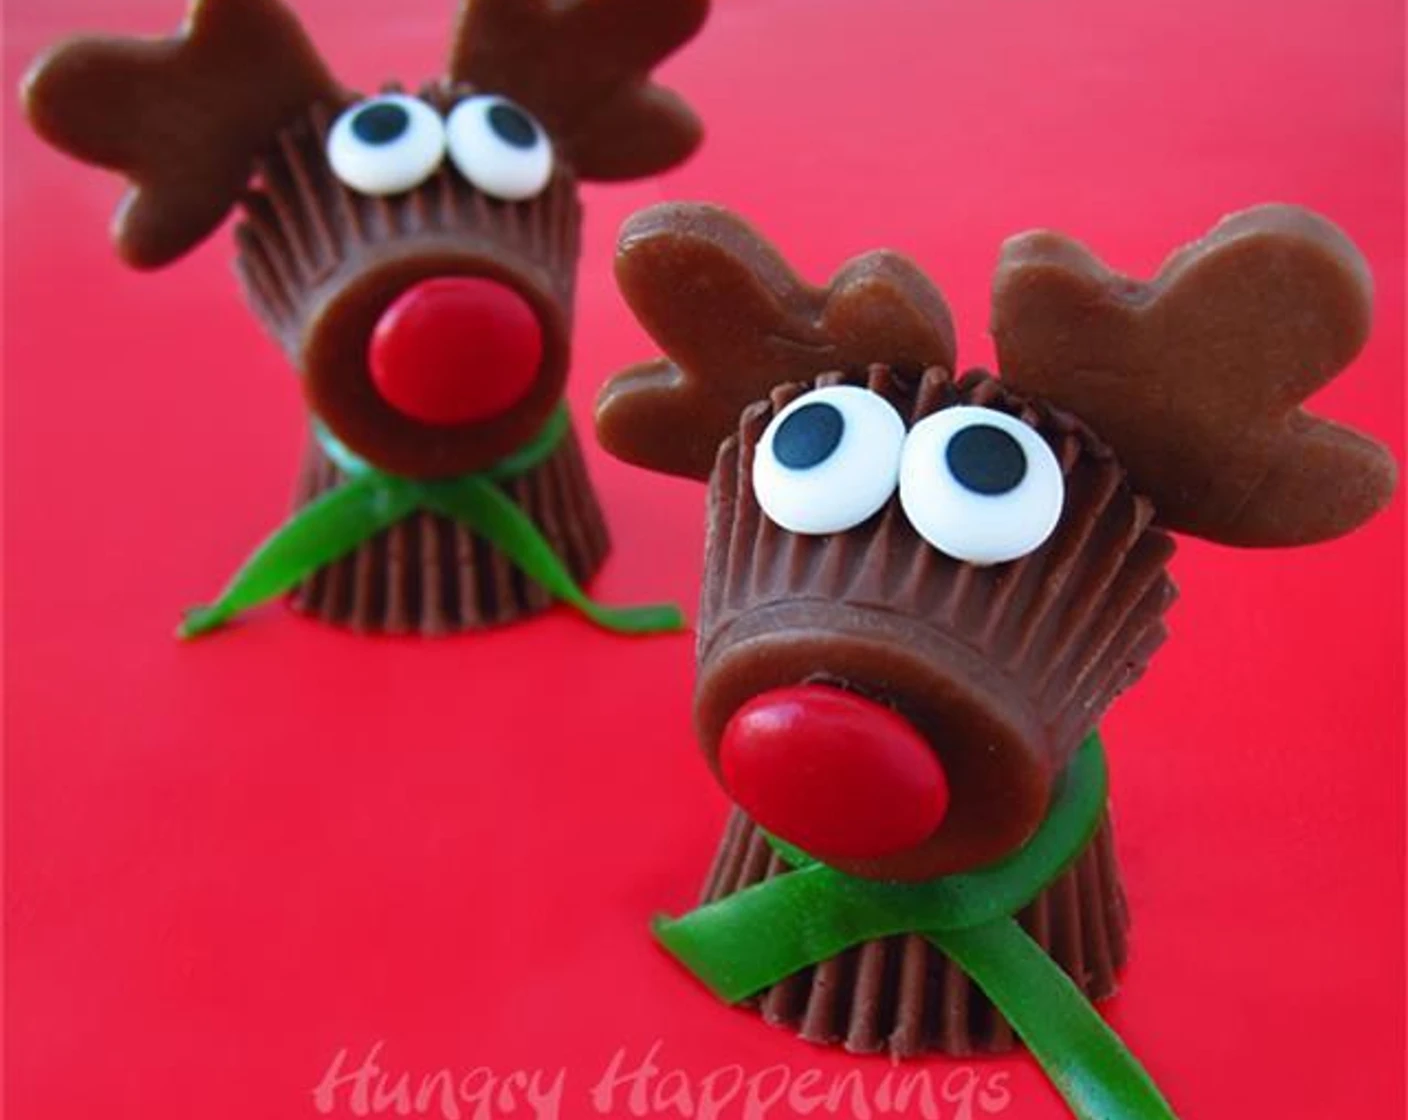 Reese’s Cup Rudolph the Red Nose Reindeer Treats